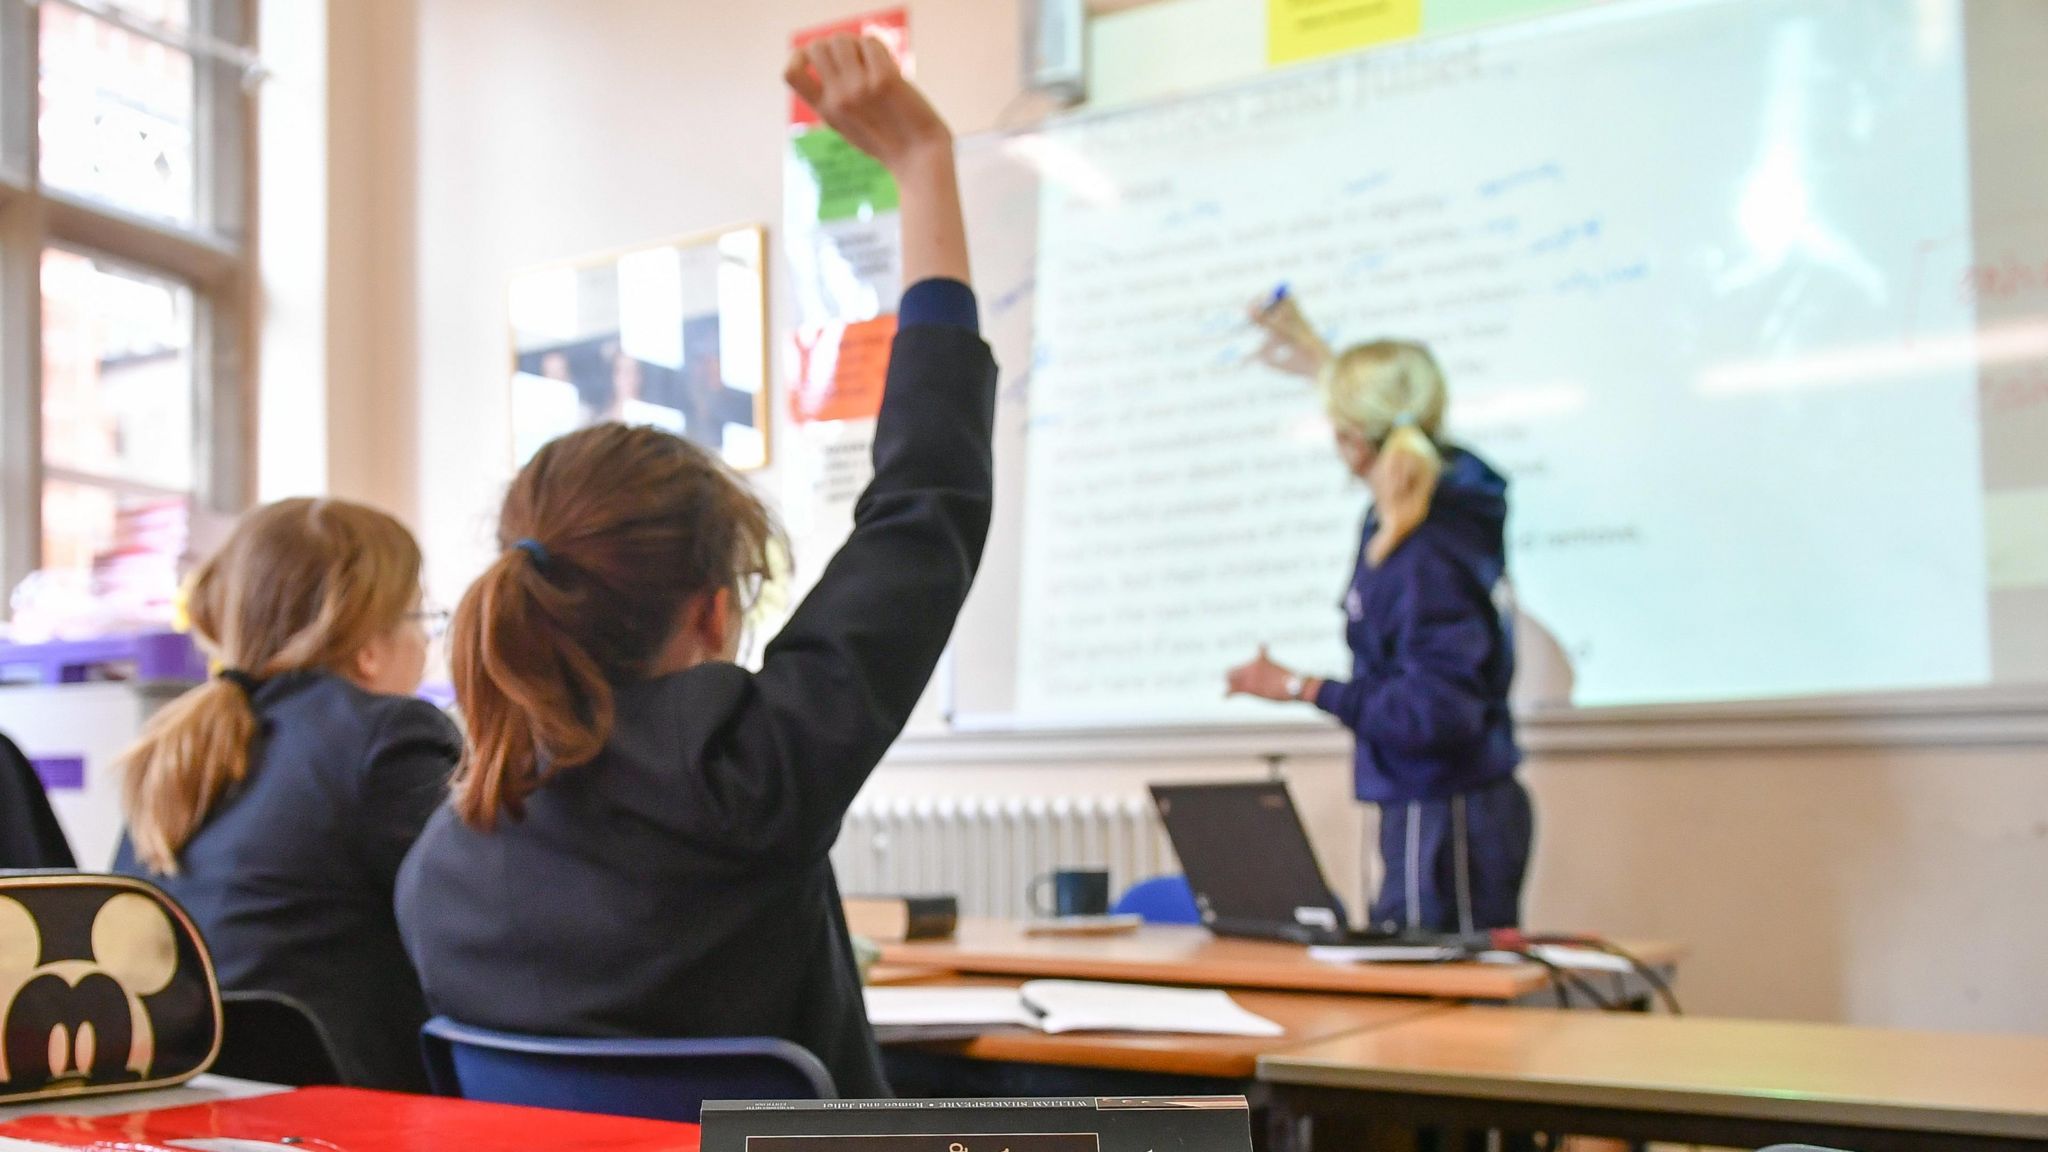 School children in classroom holding their hands up, next to an empty desk, while teacher writes on a white board